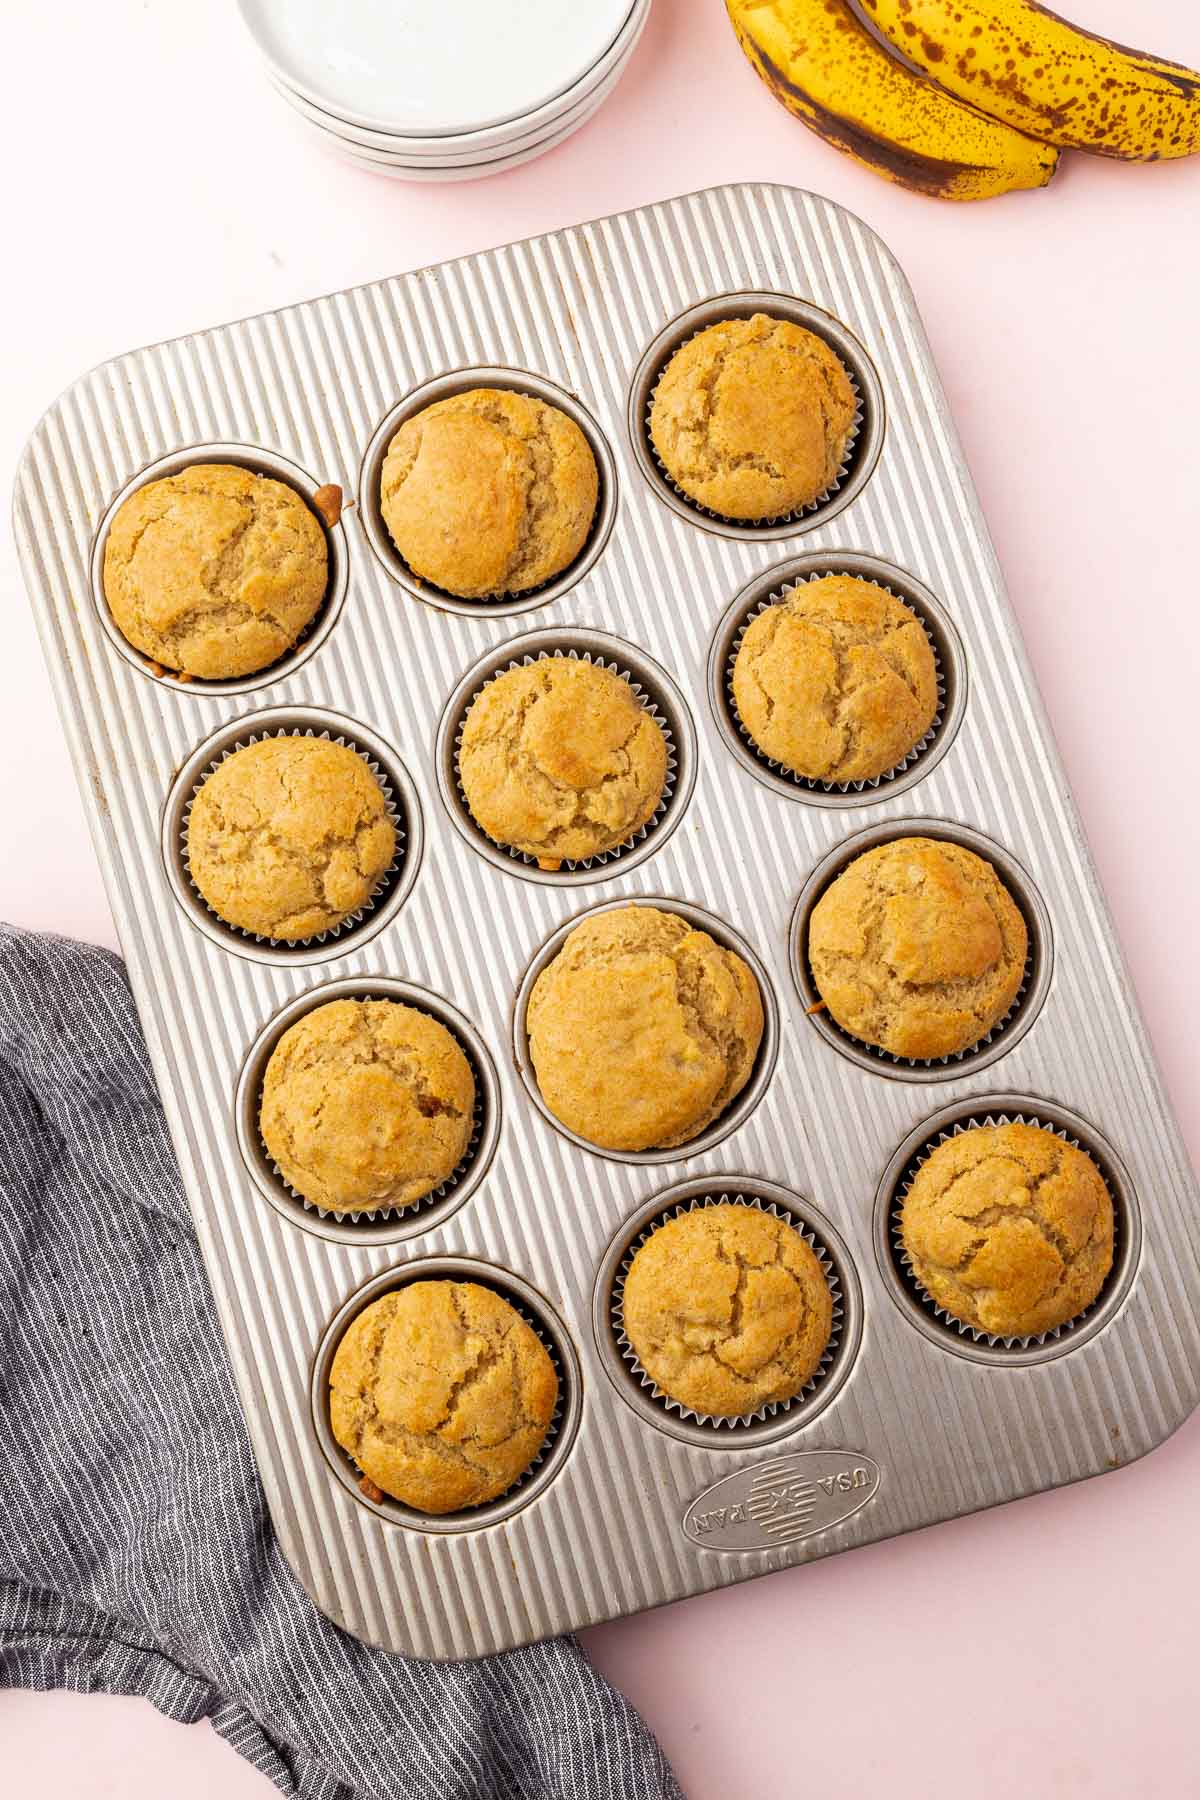 A doze gluten-free banana muffins in a silver muffin tin with ripe bananas to the side.